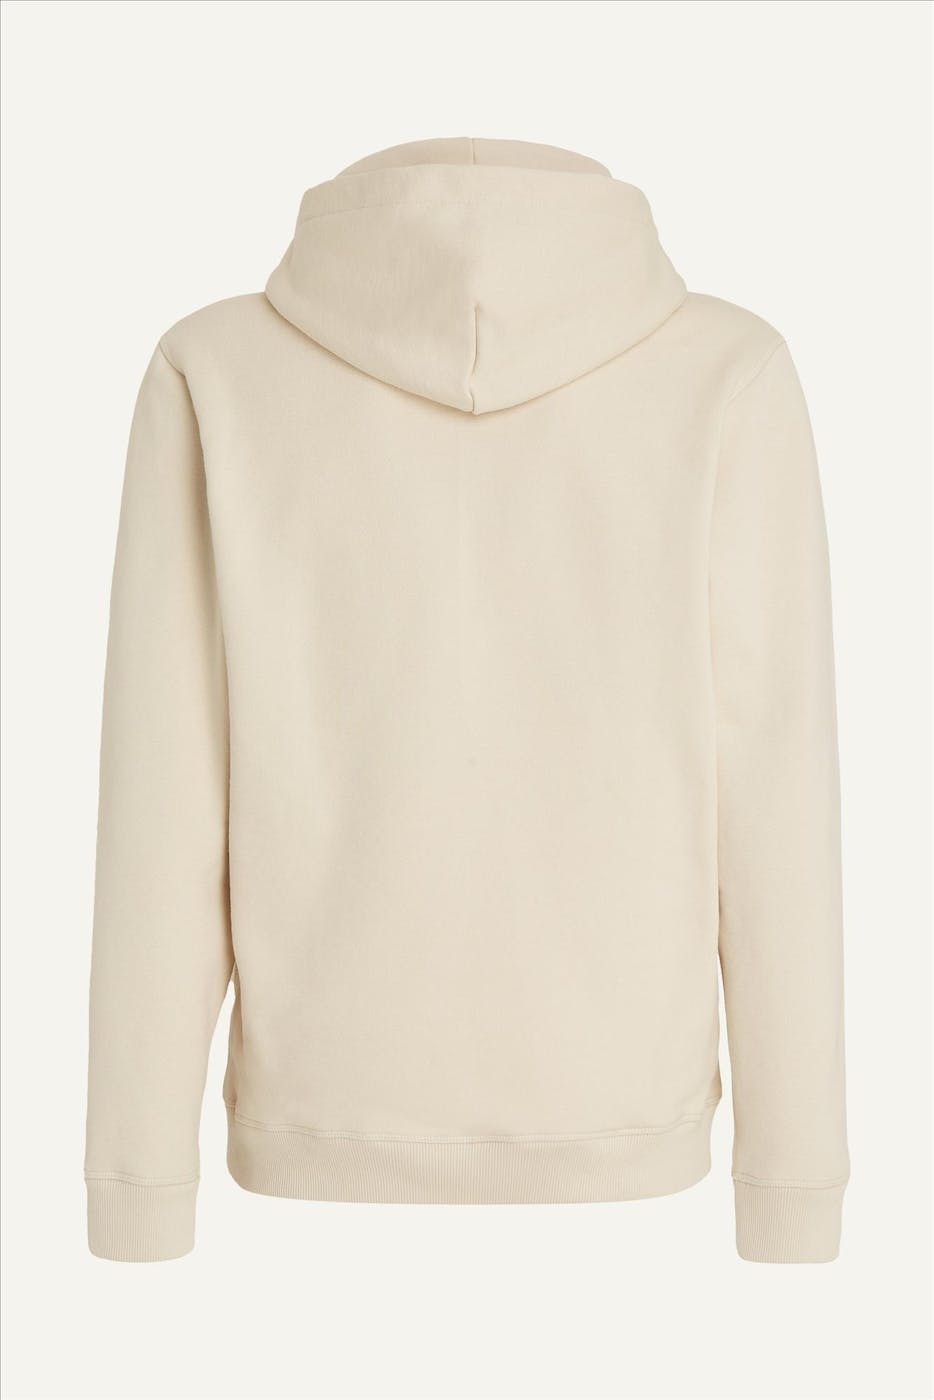 Tommy Jeans - Beige Bold Classics hoodie